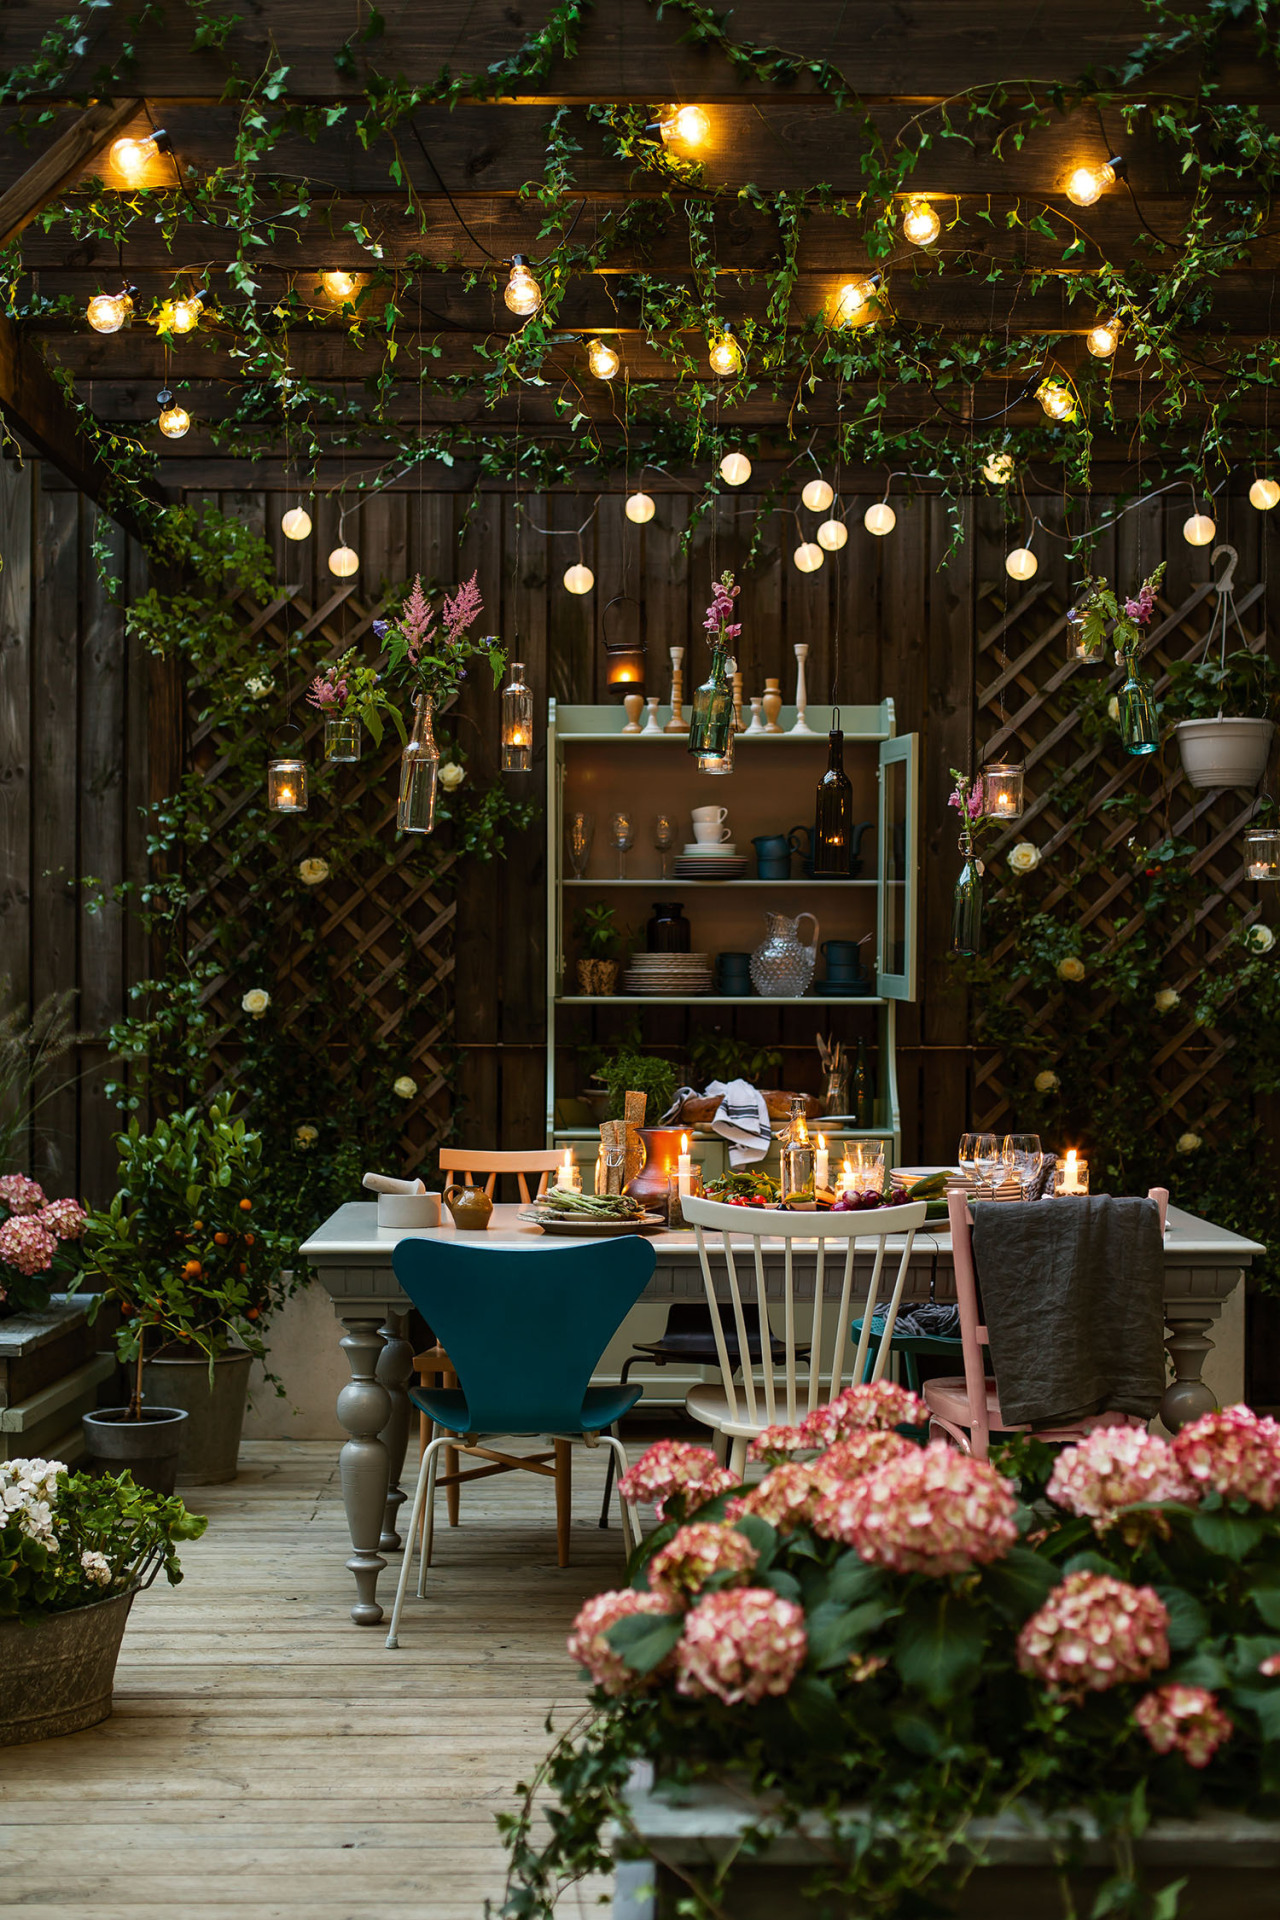 outdoor area dining entertaining ultimate yours summer create source